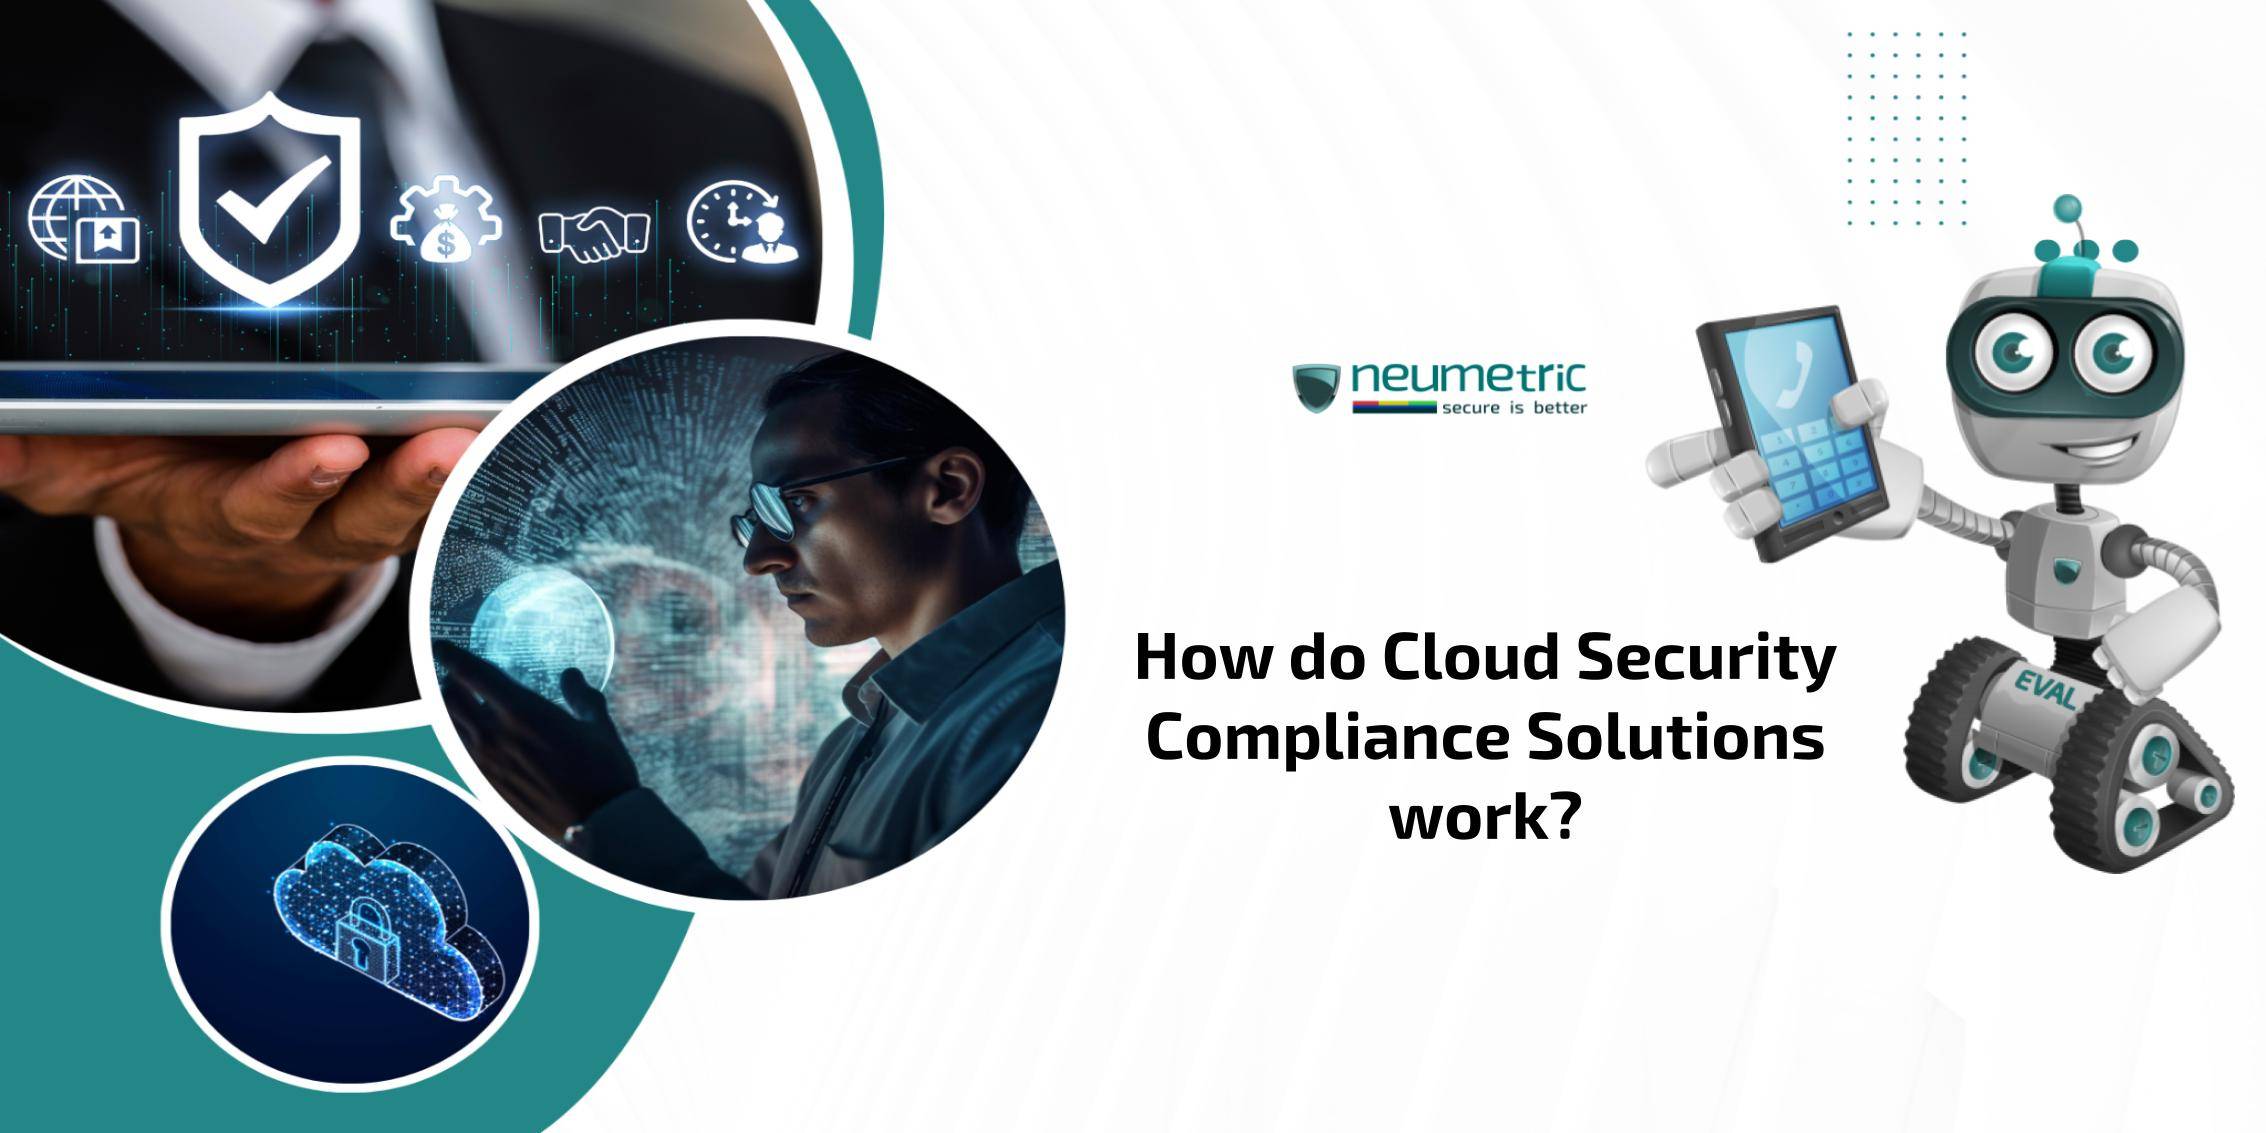 Cloud security compliance solutions